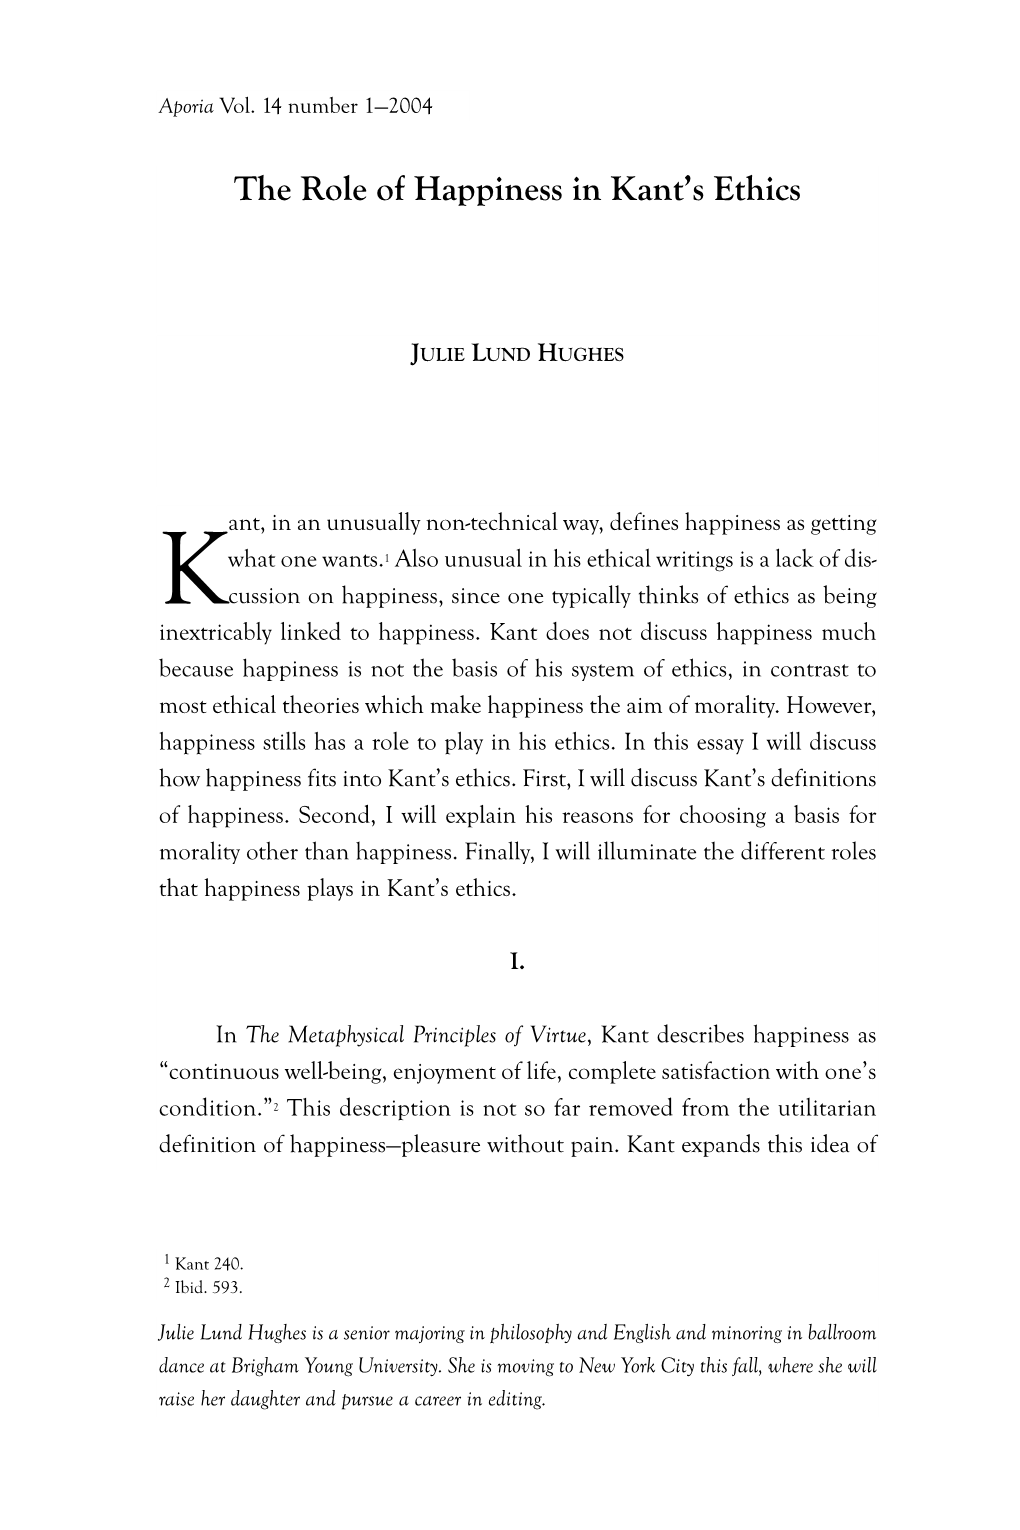 The Role of Happiness in Kant's Ethics